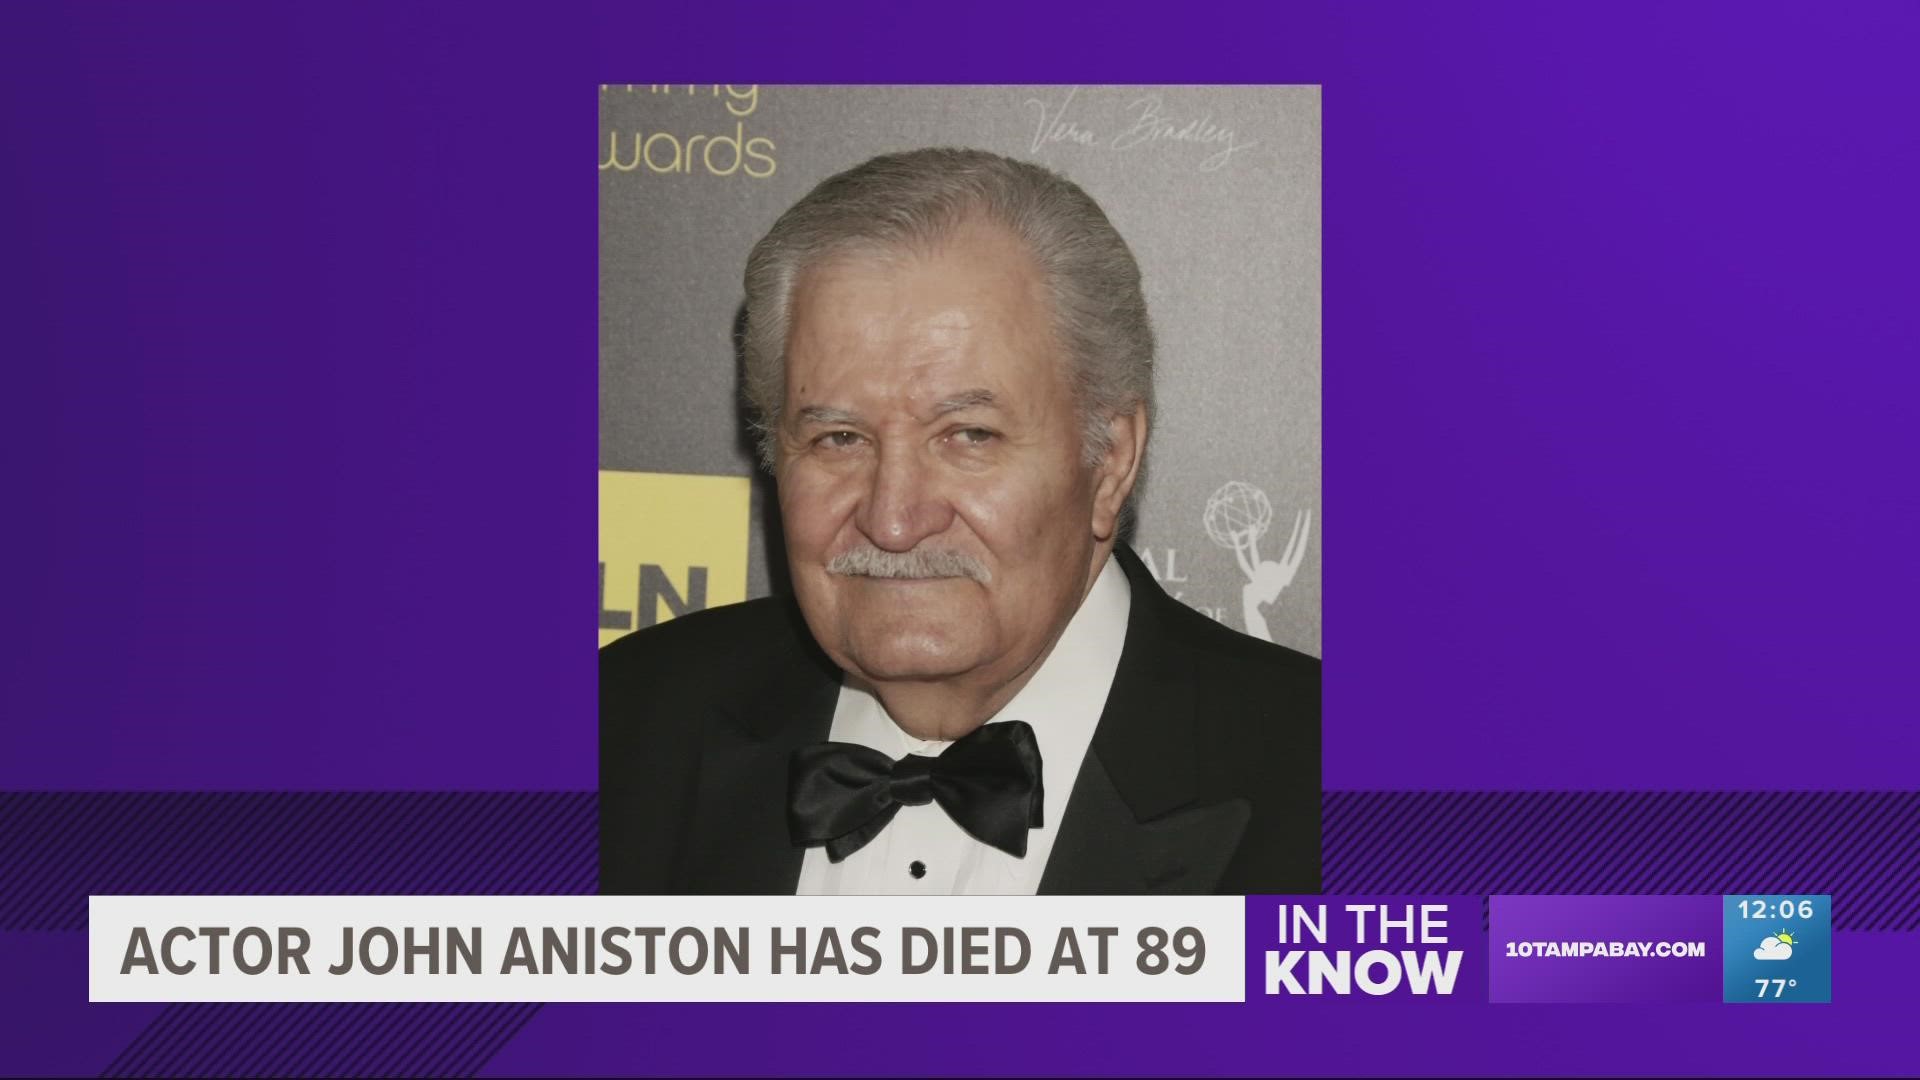 John Aniston was honored earlier this year with a Daytime Emmy Lifetime Achievement Award, presented with a sweet message from his daughter.